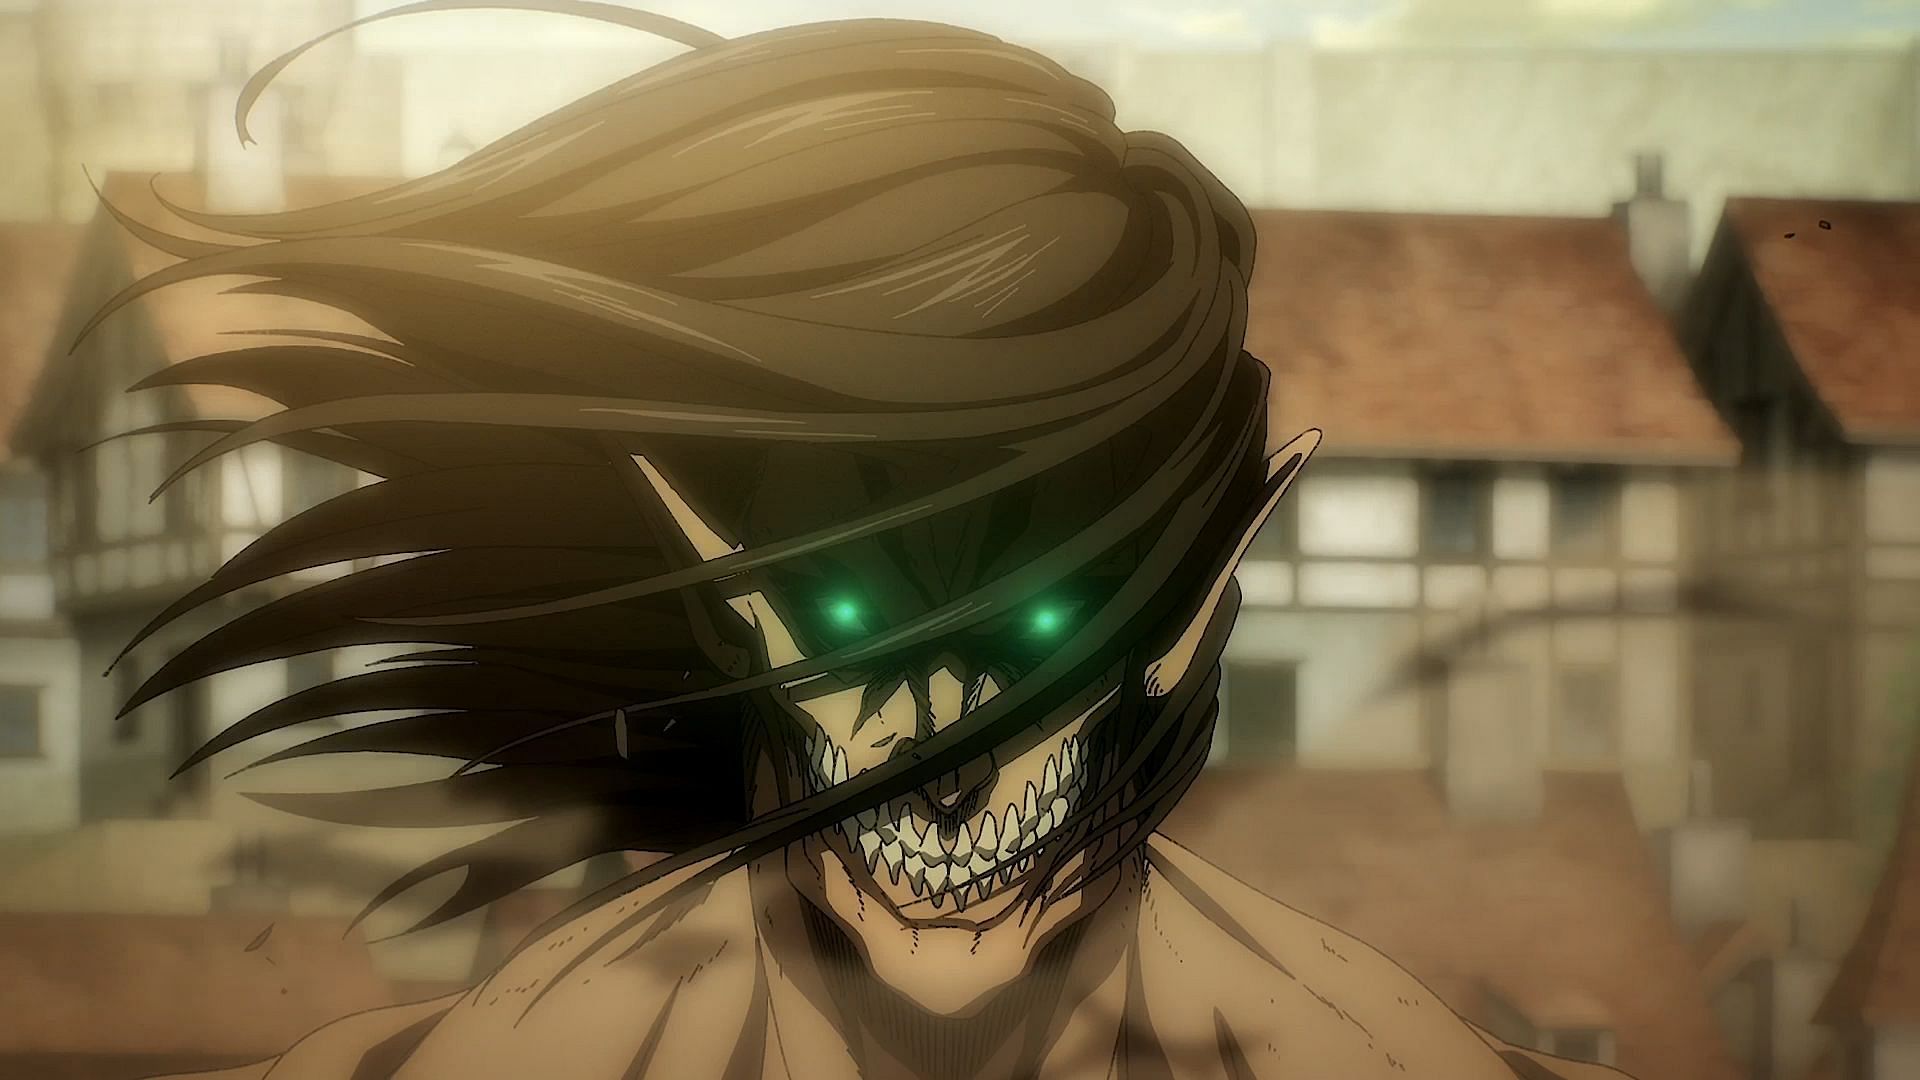 Attack On Titan Final Season Part 4 official trailer drops at Anime Expo  Fall Release Confirmed